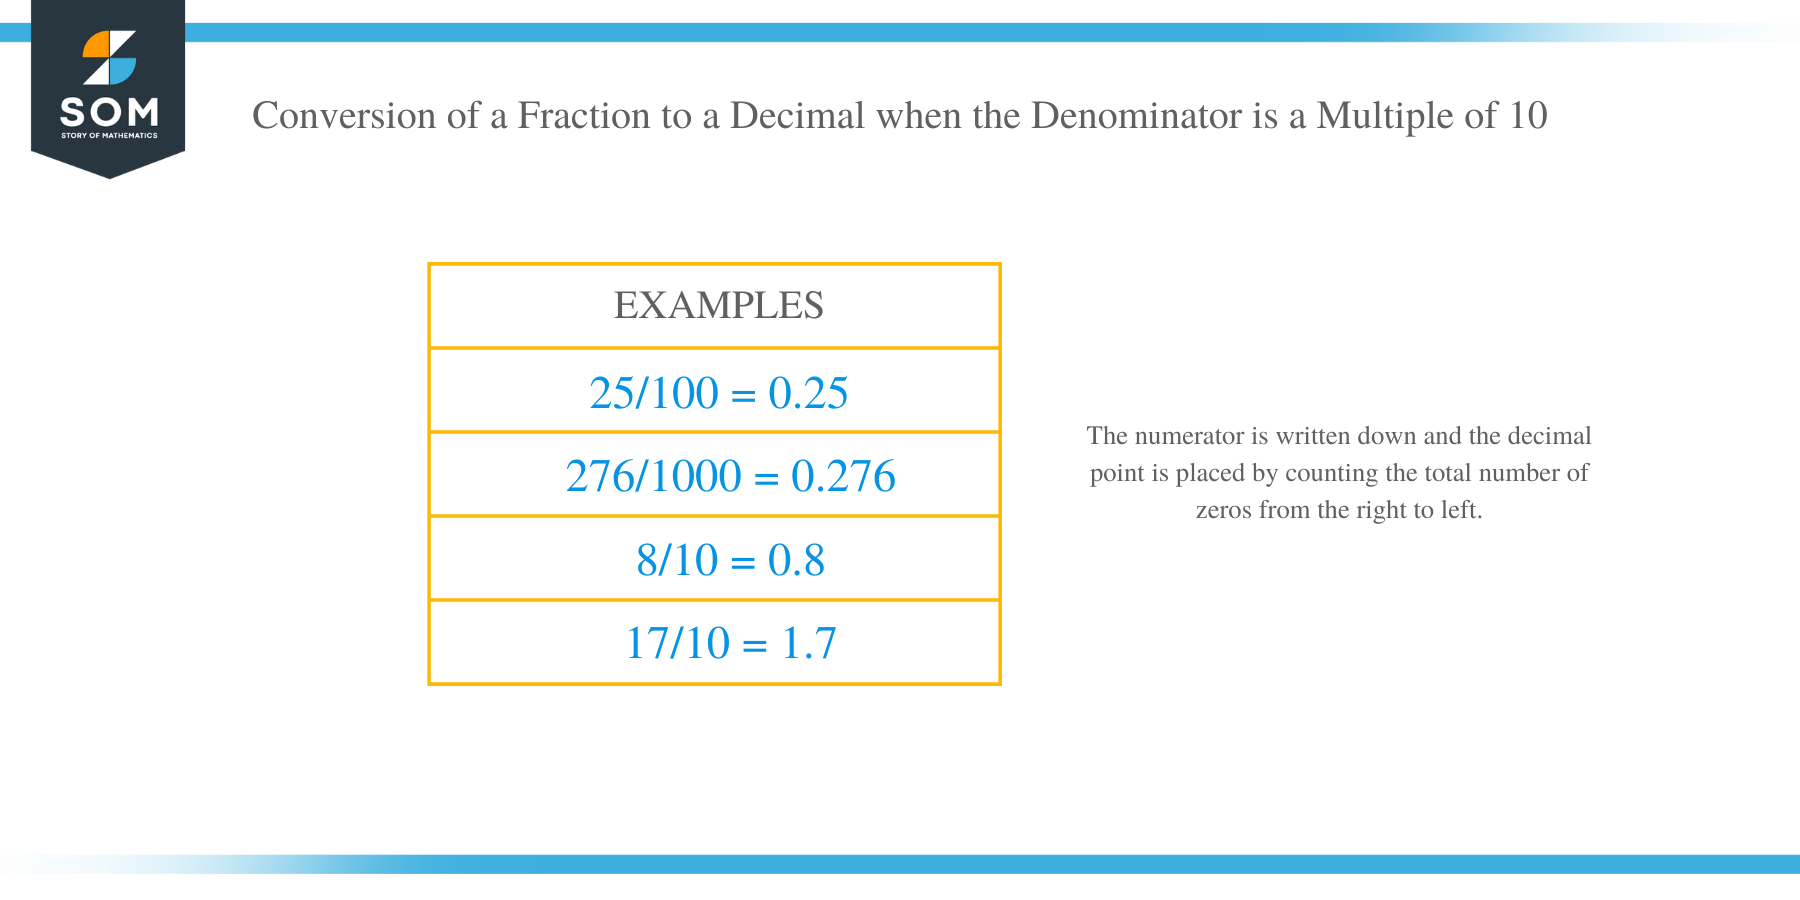 Example of Conversion of a Fraction to a Decimal